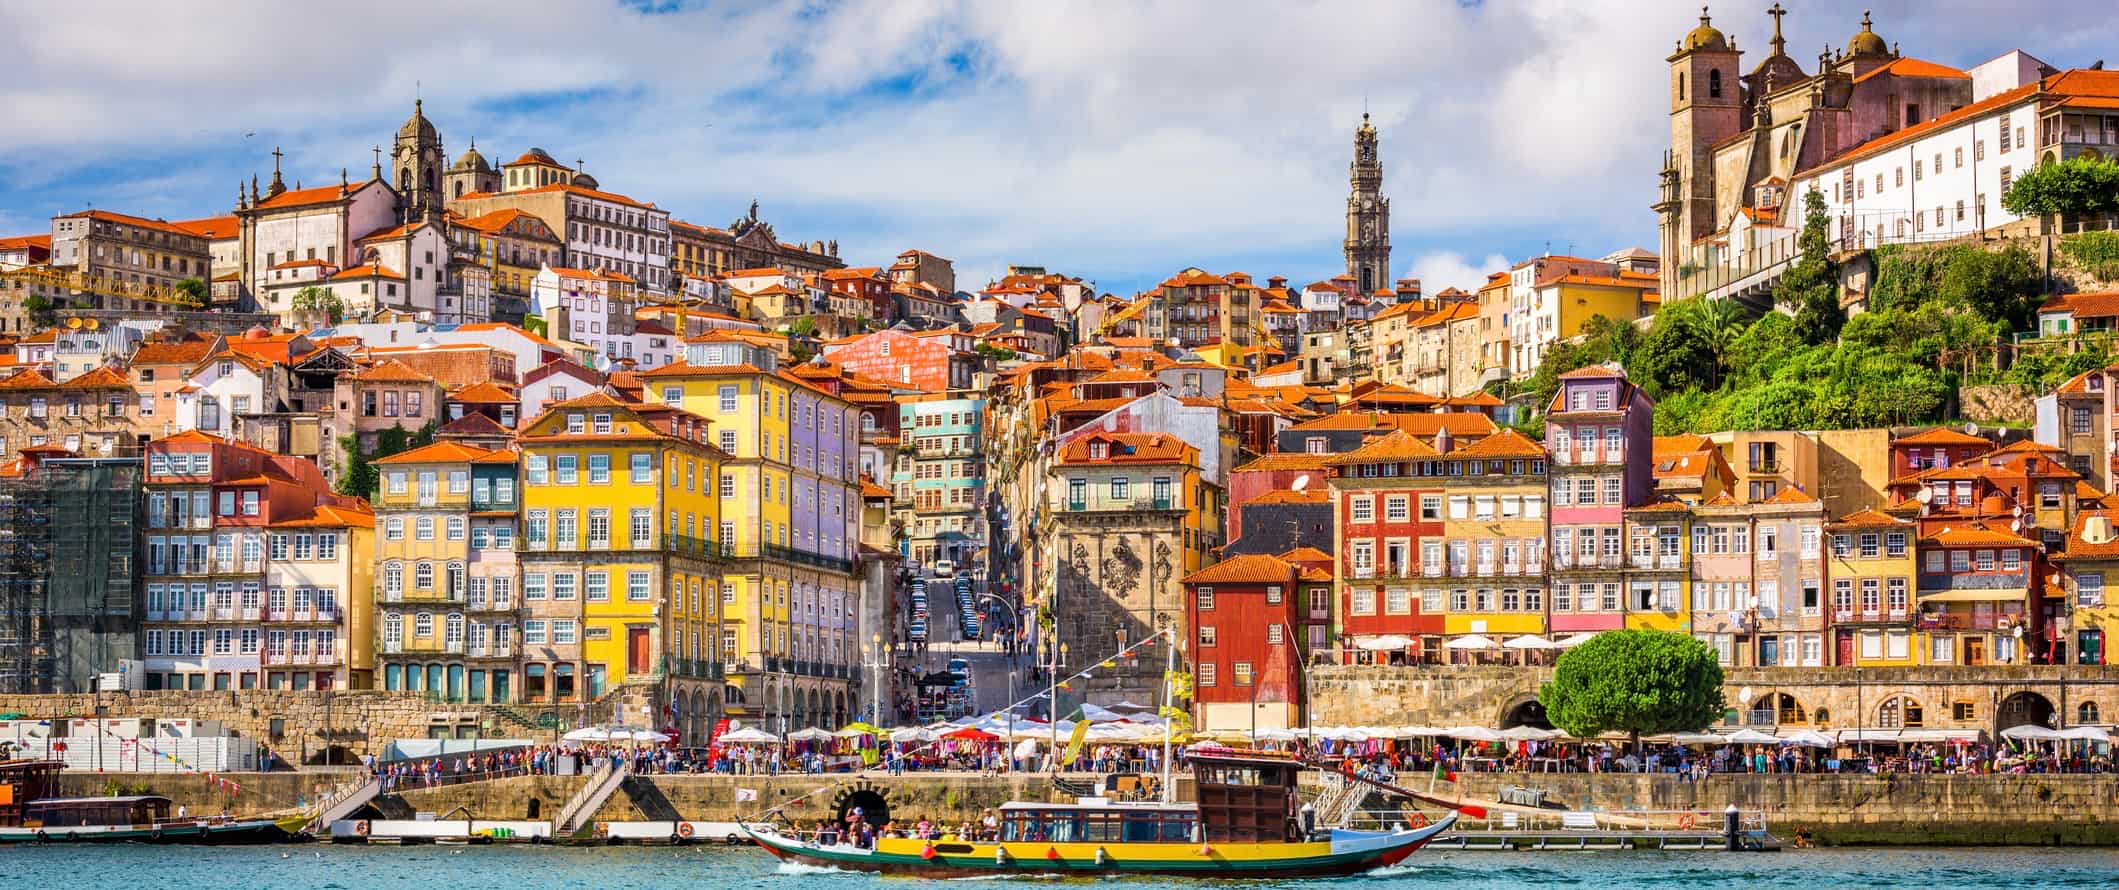 A boat passing by the colorful coast of Porto, Portugal on a busy summer day